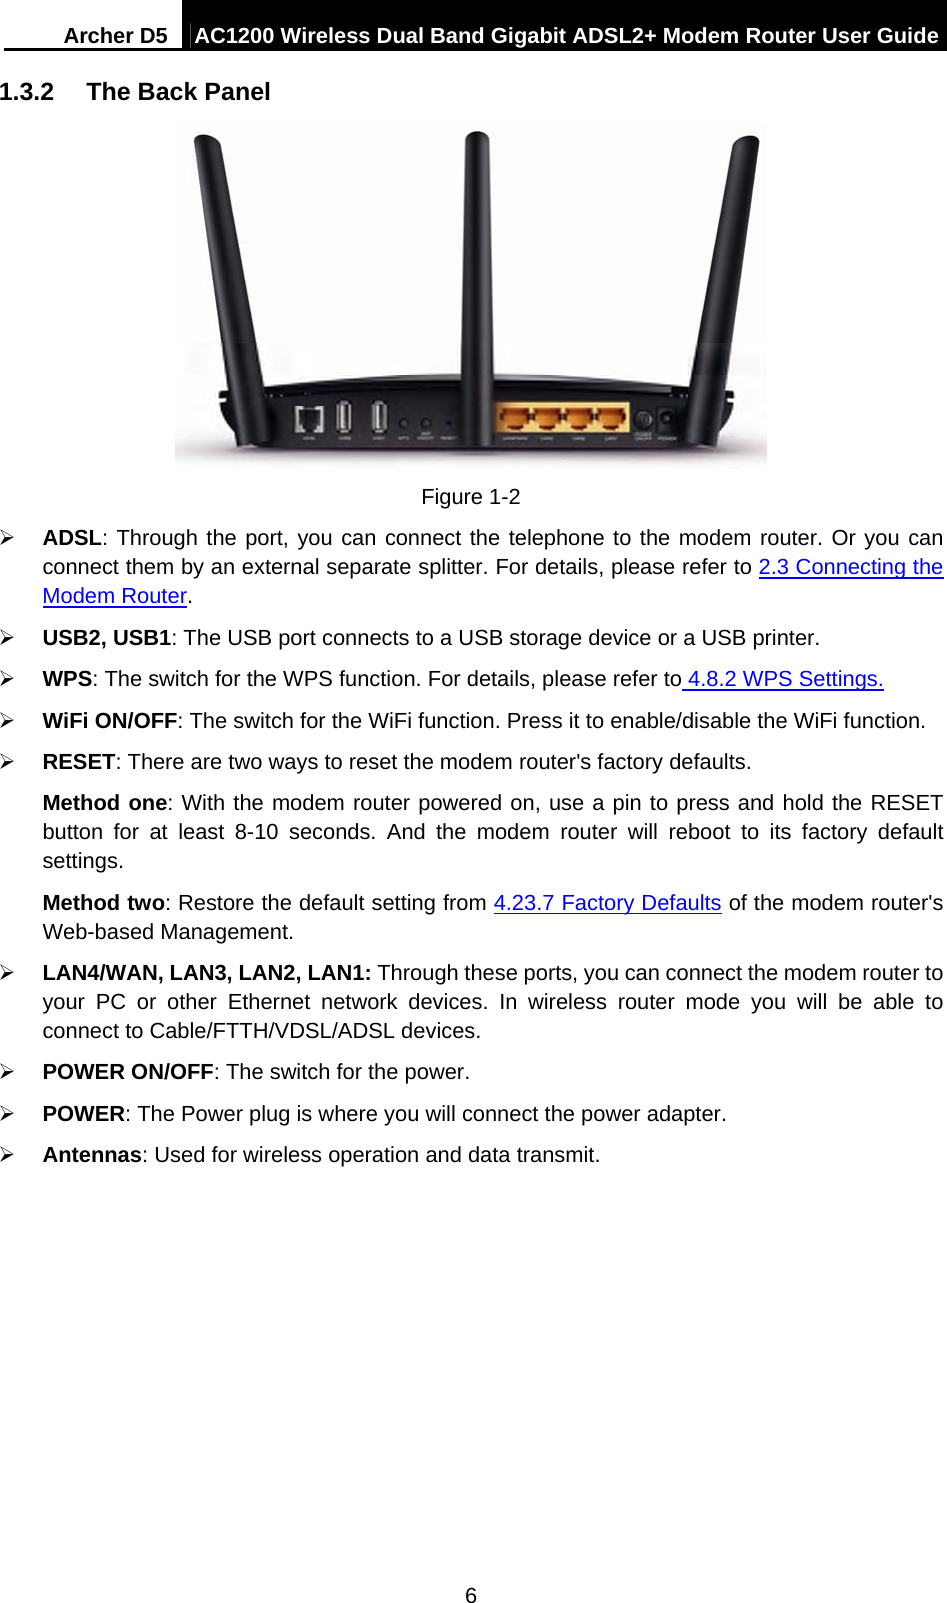 Archer D5  AC1200 Wireless Dual Band Gigabit ADSL2+ Modem Router User Guide 6 1.3.2  The Back Panel  Figure 1-2  ADSL: Through the port, you can connect the telephone to the modem router. Or you can connect them by an external separate splitter. For details, please refer to 2.3 Connecting the Modem Router.   USB2, USB1: The USB port connects to a USB storage device or a USB printer.  WPS: The switch for the WPS function. For details, please refer to 4.8.2 WPS Settings.  WiFi ON/OFF: The switch for the WiFi function. Press it to enable/disable the WiFi function.  RESET: There are two ways to reset the modem router&apos;s factory defaults.   Method one: With the modem router powered on, use a pin to press and hold the RESET button for at least 8-10 seconds. And the modem router will reboot to its factory default settings. Method two: Restore the default setting from 4.23.7 Factory Defaults of the modem router&apos;s Web-based Management.  LAN4/WAN, LAN3, LAN2, LAN1: Through these ports, you can connect the modem router to your PC or other Ethernet network devices. In wireless router mode you will be able to connect to Cable/FTTH/VDSL/ADSL devices.  POWER ON/OFF: The switch for the power.  POWER: The Power plug is where you will connect the power adapter.  Antennas: Used for wireless operation and data transmit. 